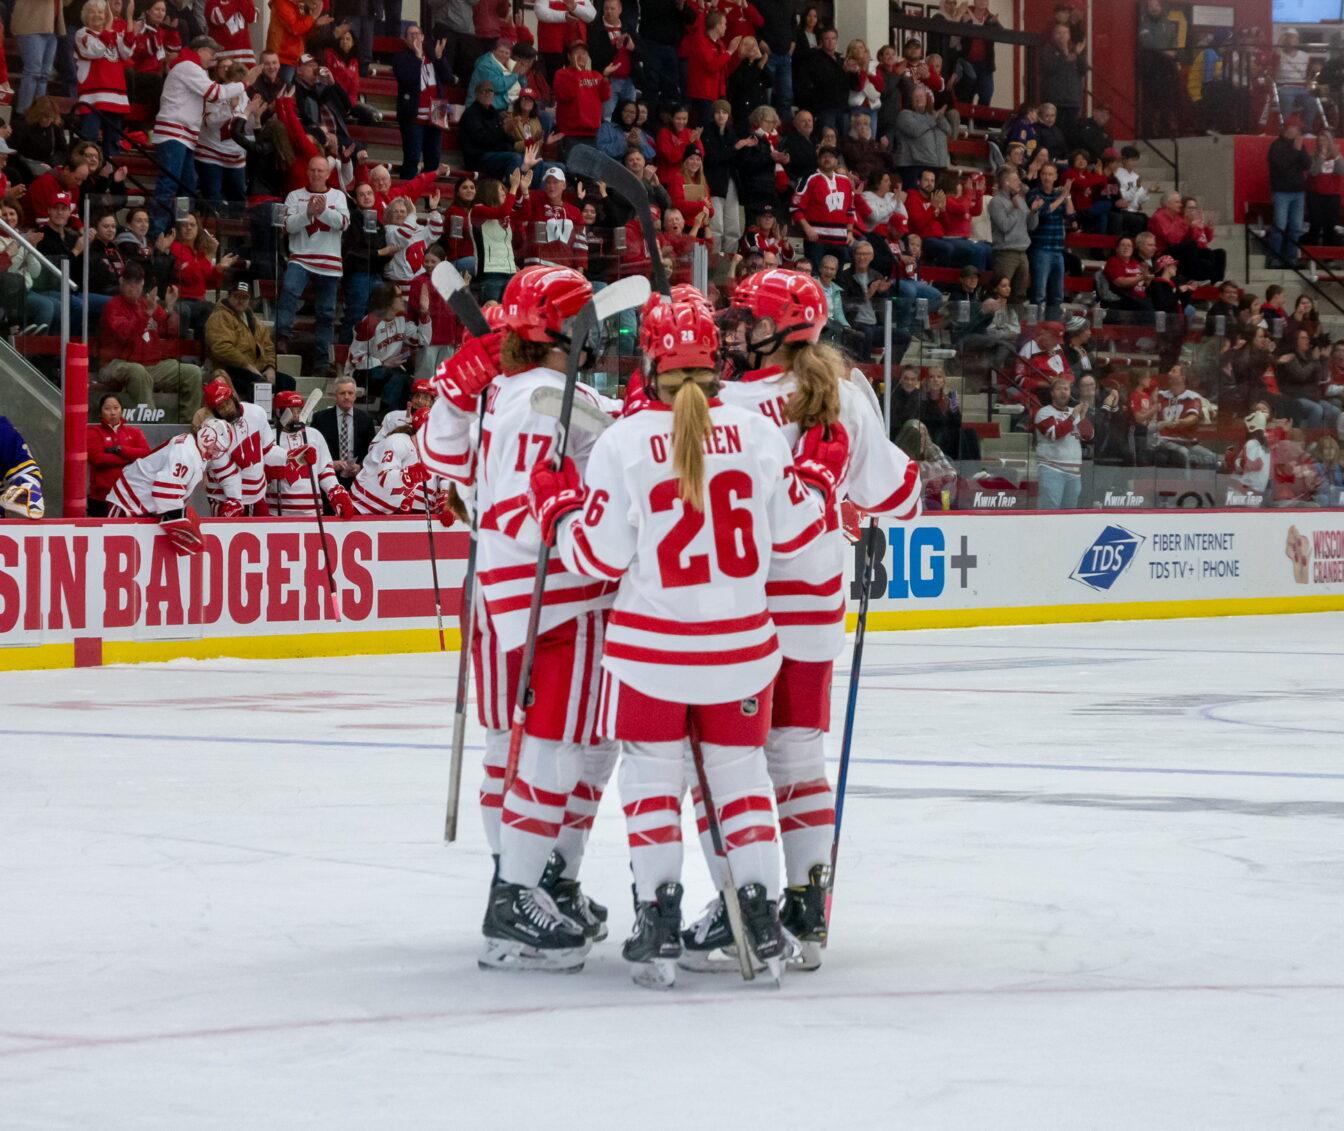 Women’s Hockey: Analysis of key players, strategy behind Wisconsin’s consistent success